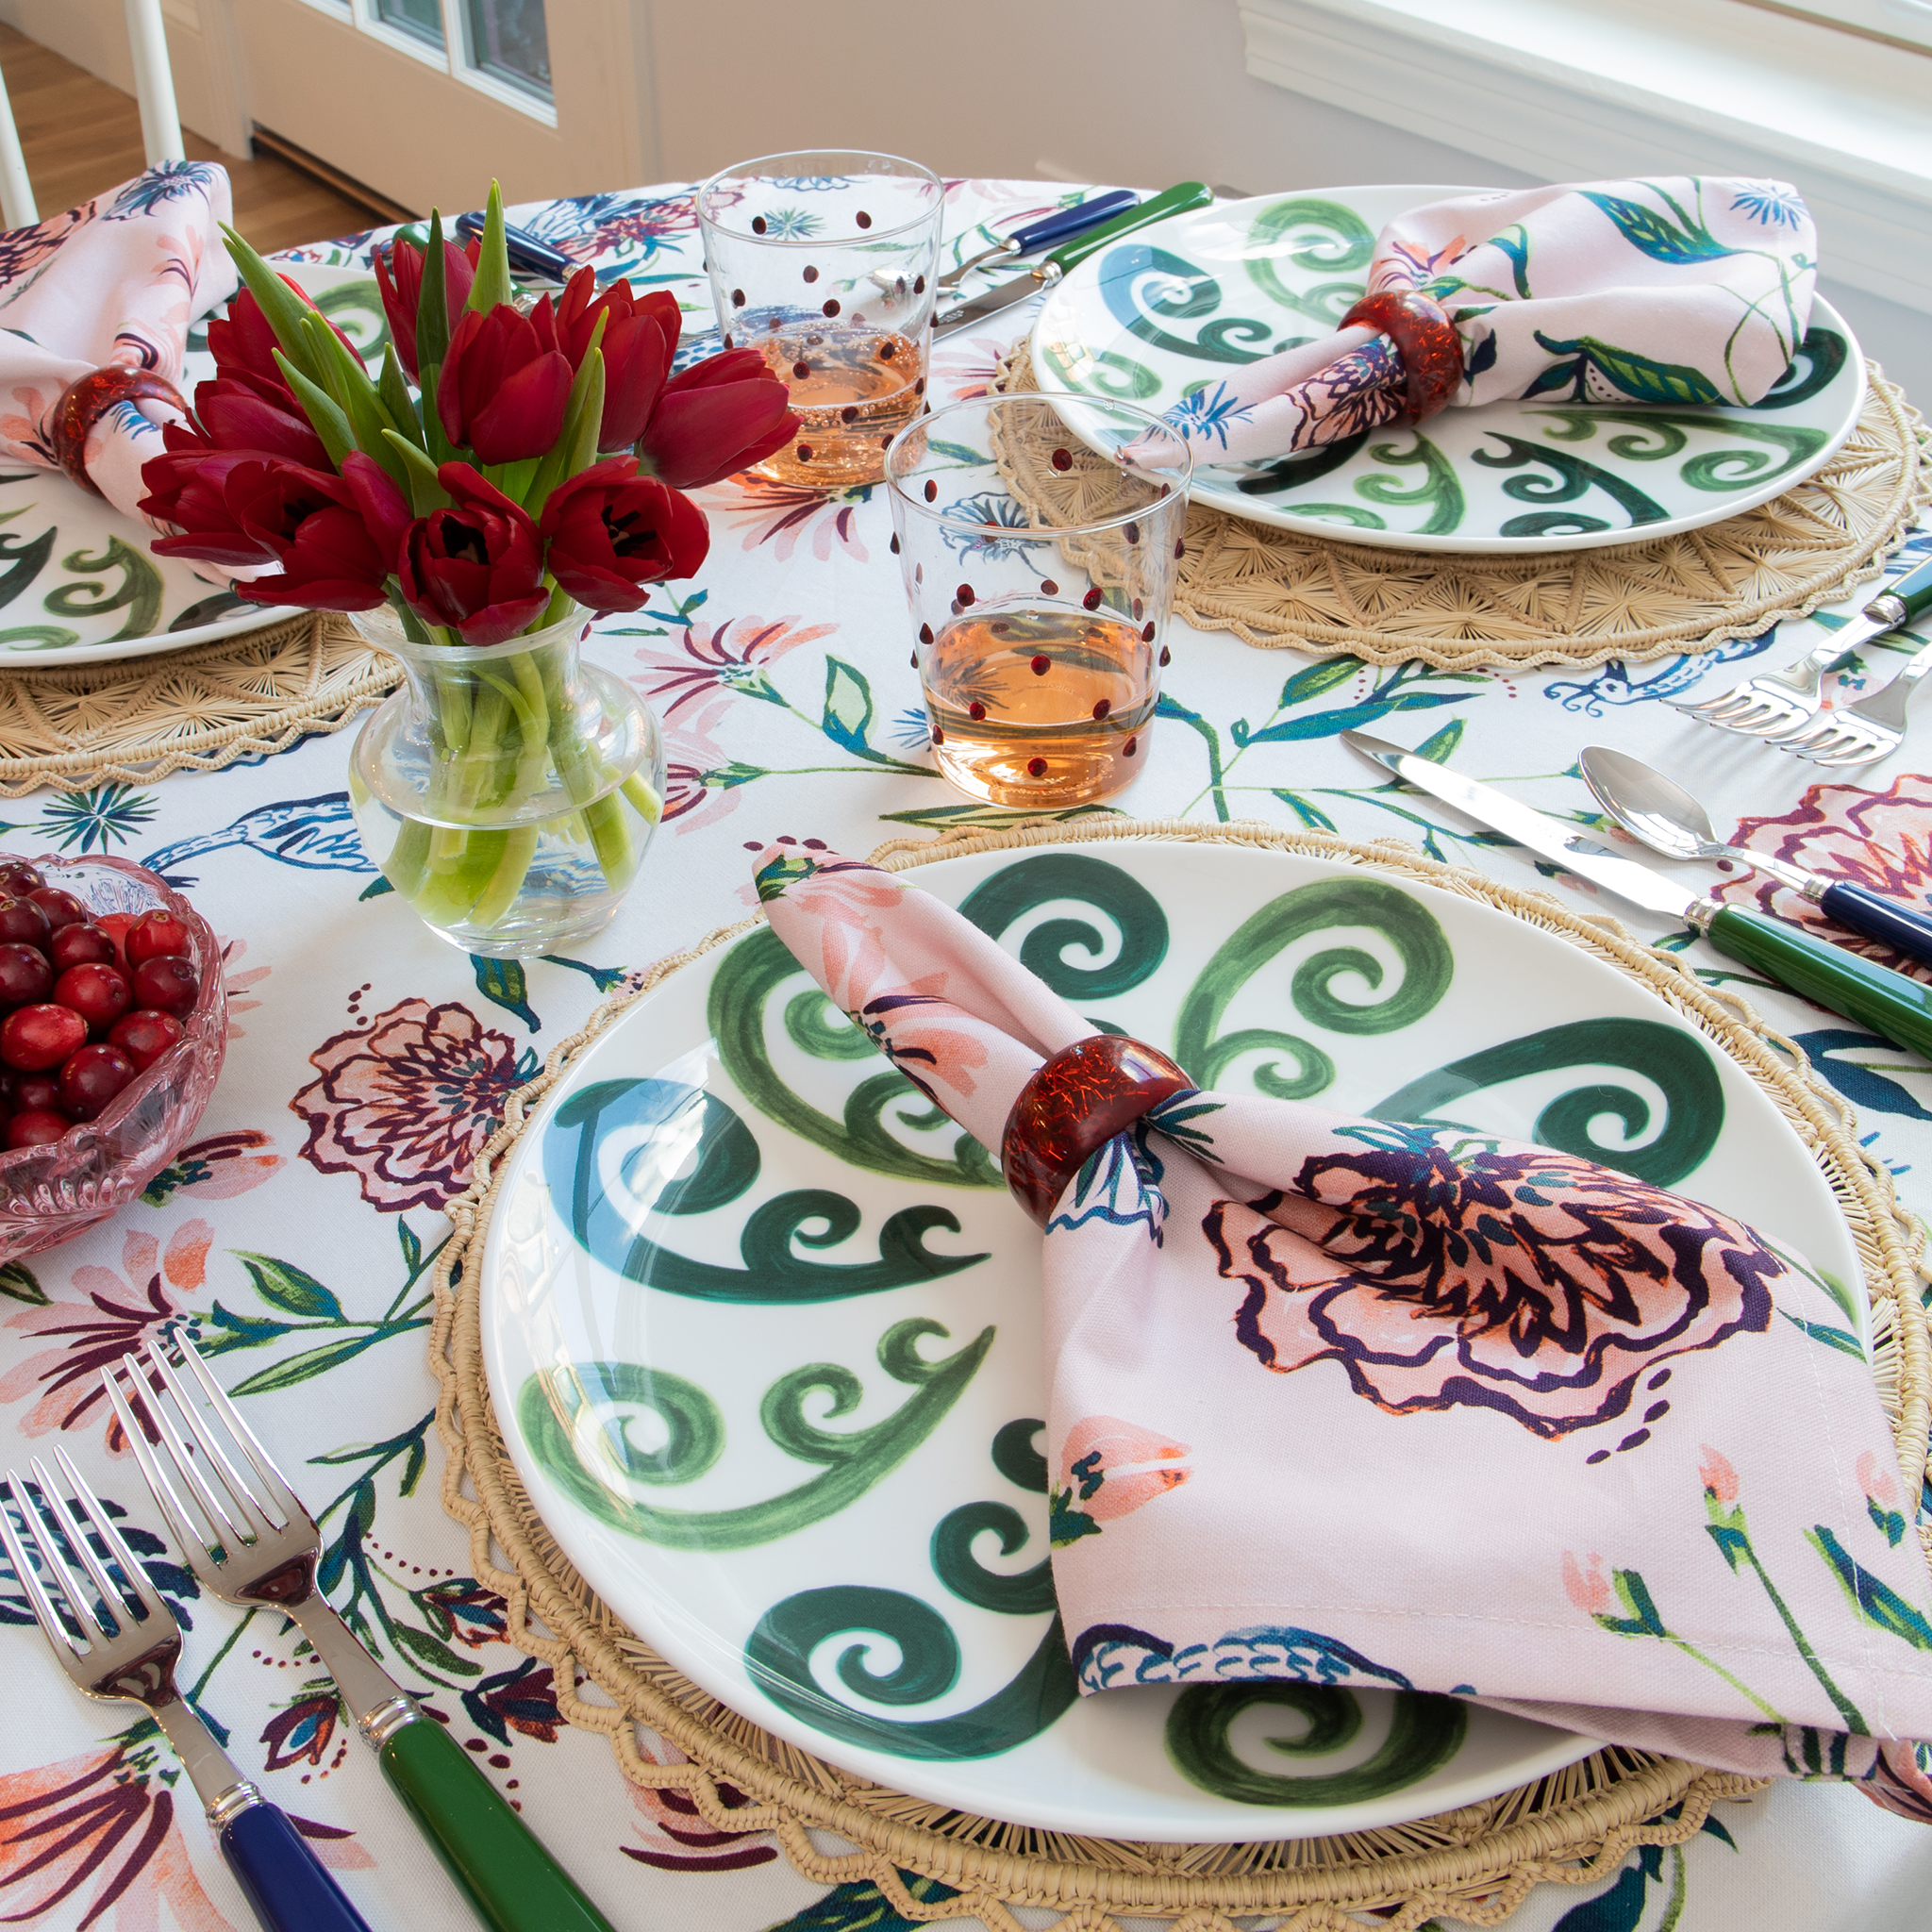 Table setting Close-Up with Rose Chinoiserie Table Cloth Napkin on plate styled with red roses in a transparent vase